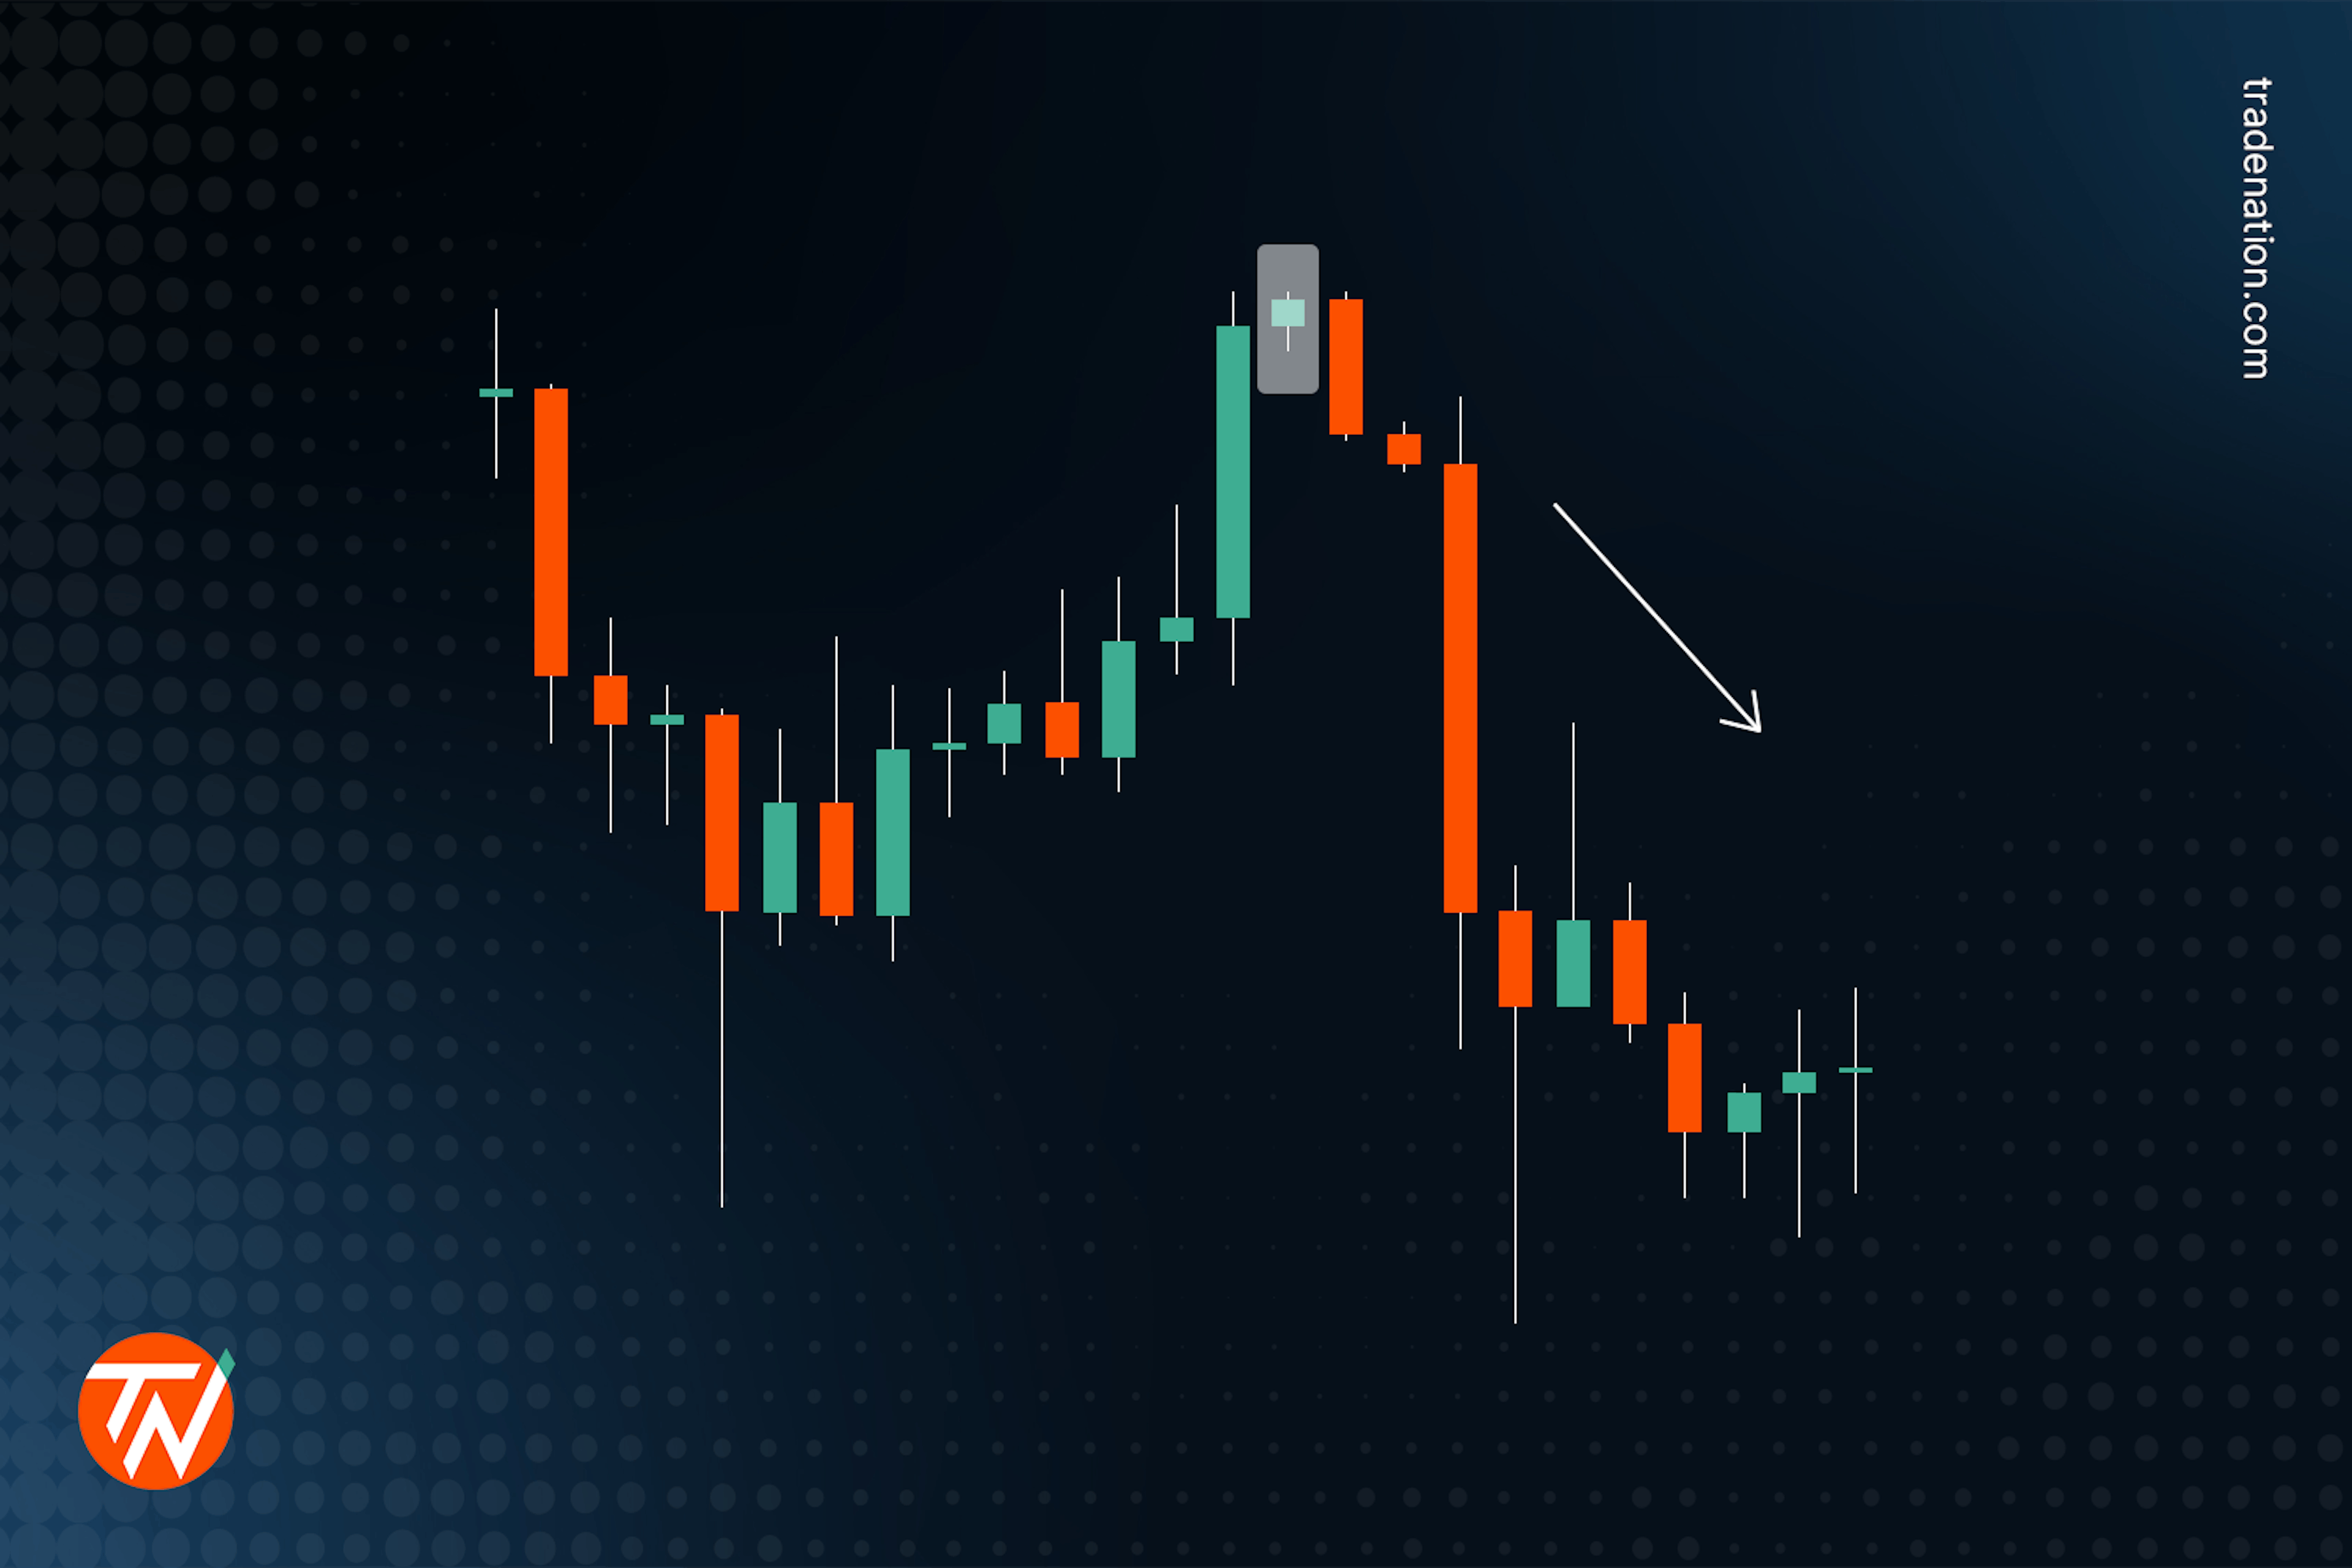 Evening star candlestick pattern demonstrated